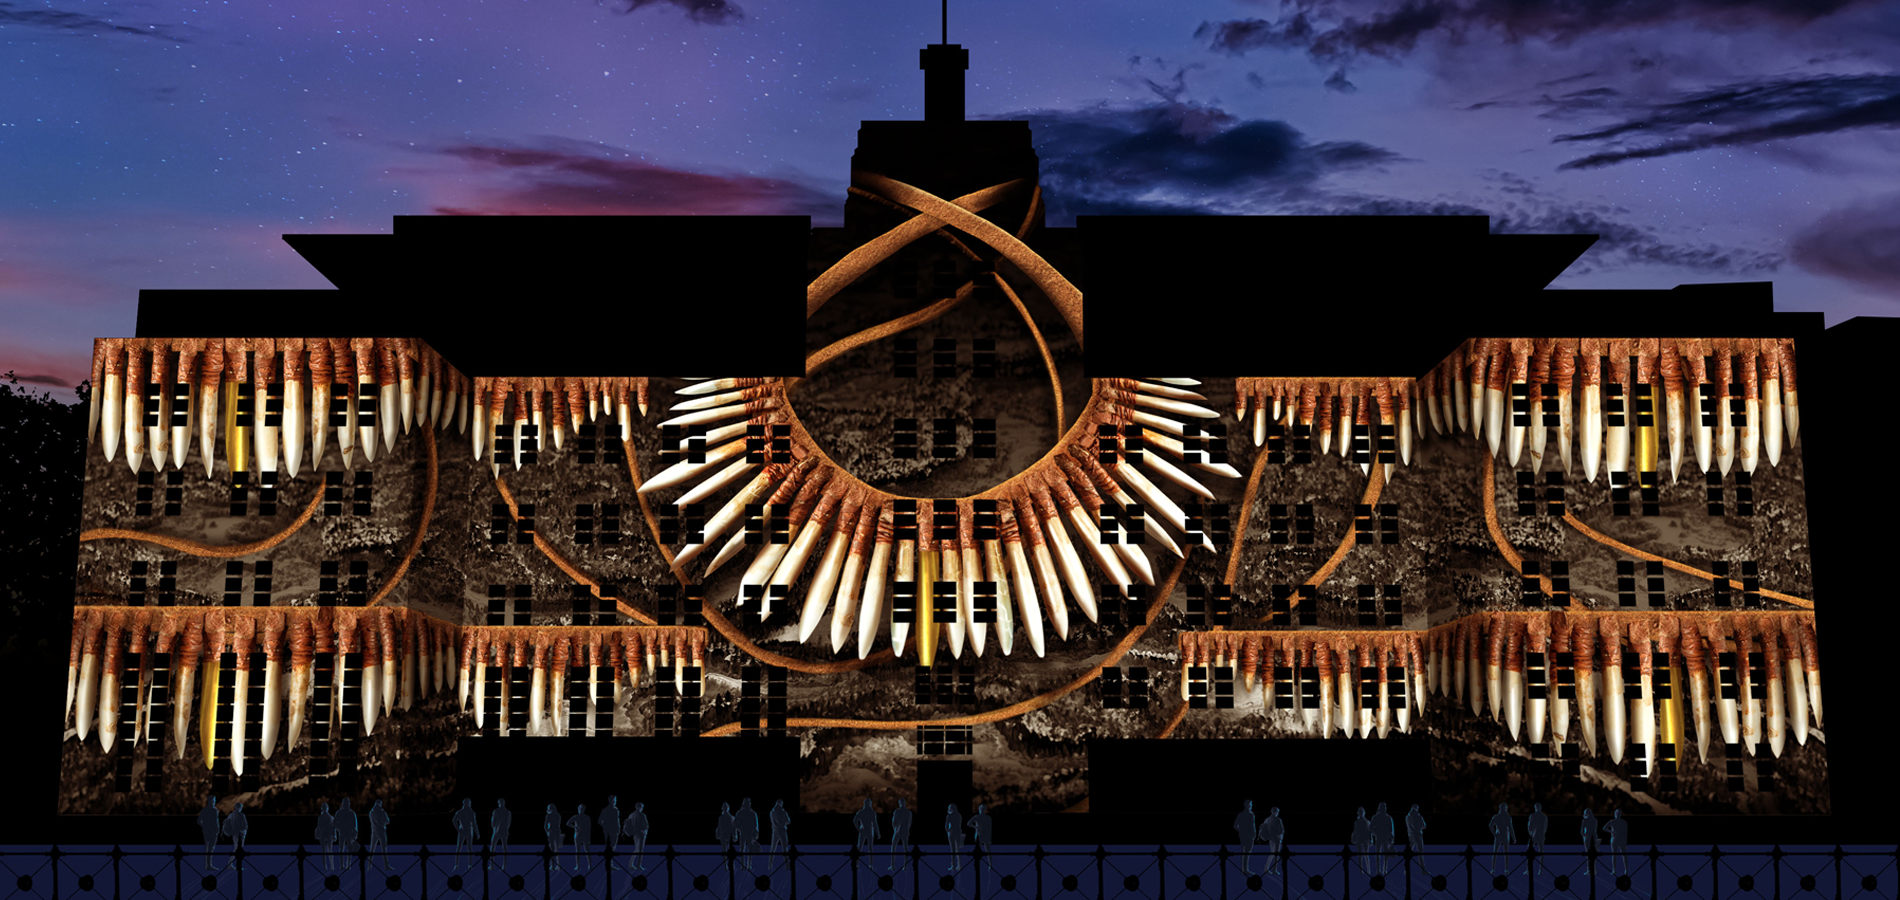 Image of a necklace made of leather, kangaroo teeth and sinew projected onto the façade of the MCA building in Sydney at dusk.